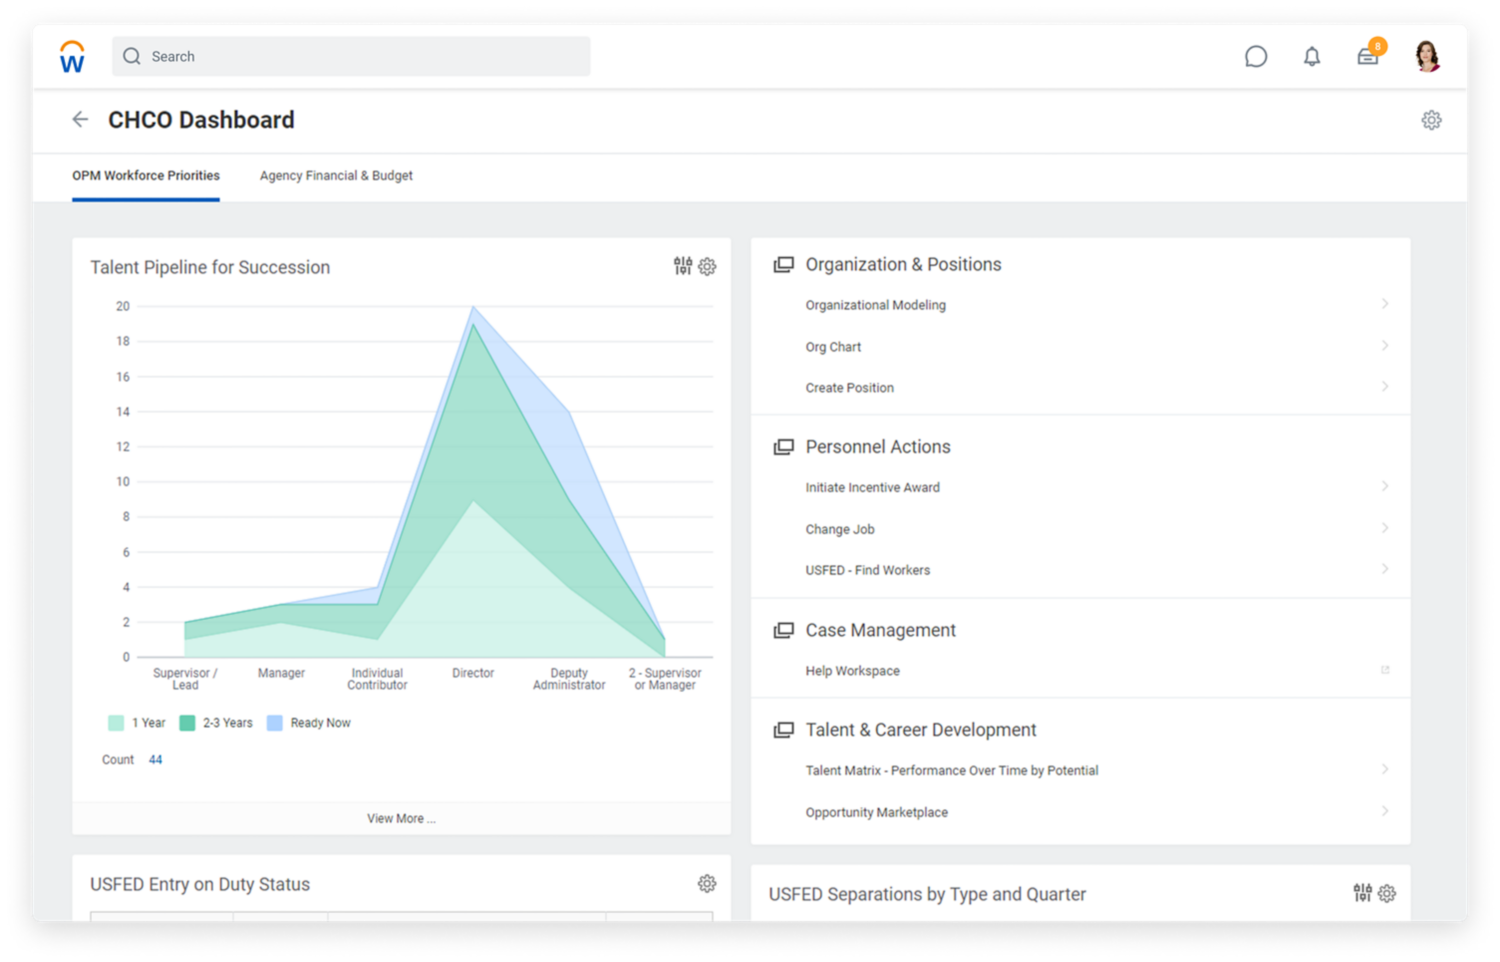 CHRO dashboard for federal government industry